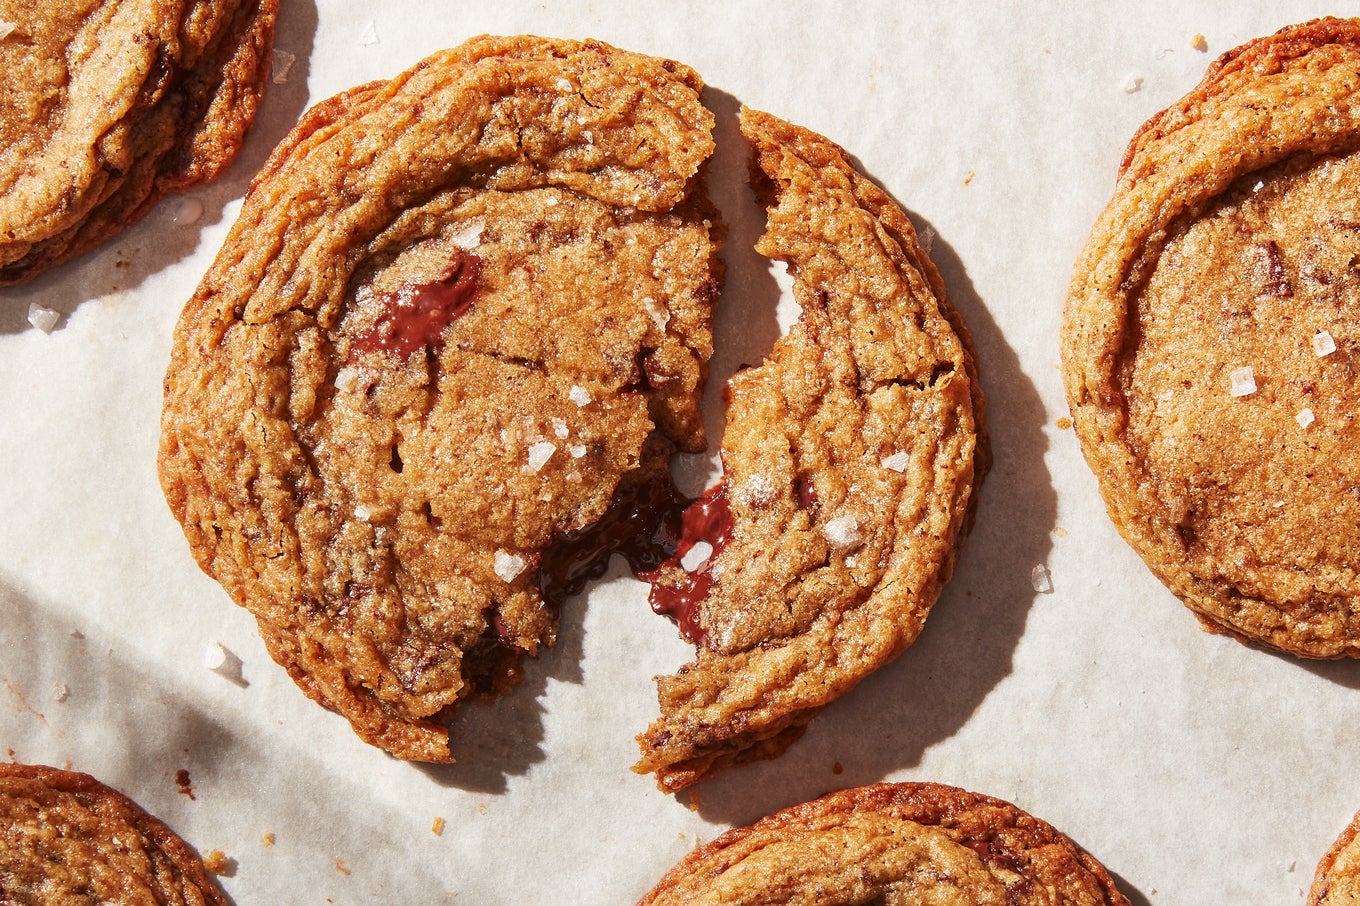 The Secret Step To Baking Cookies With Crinkly Edges